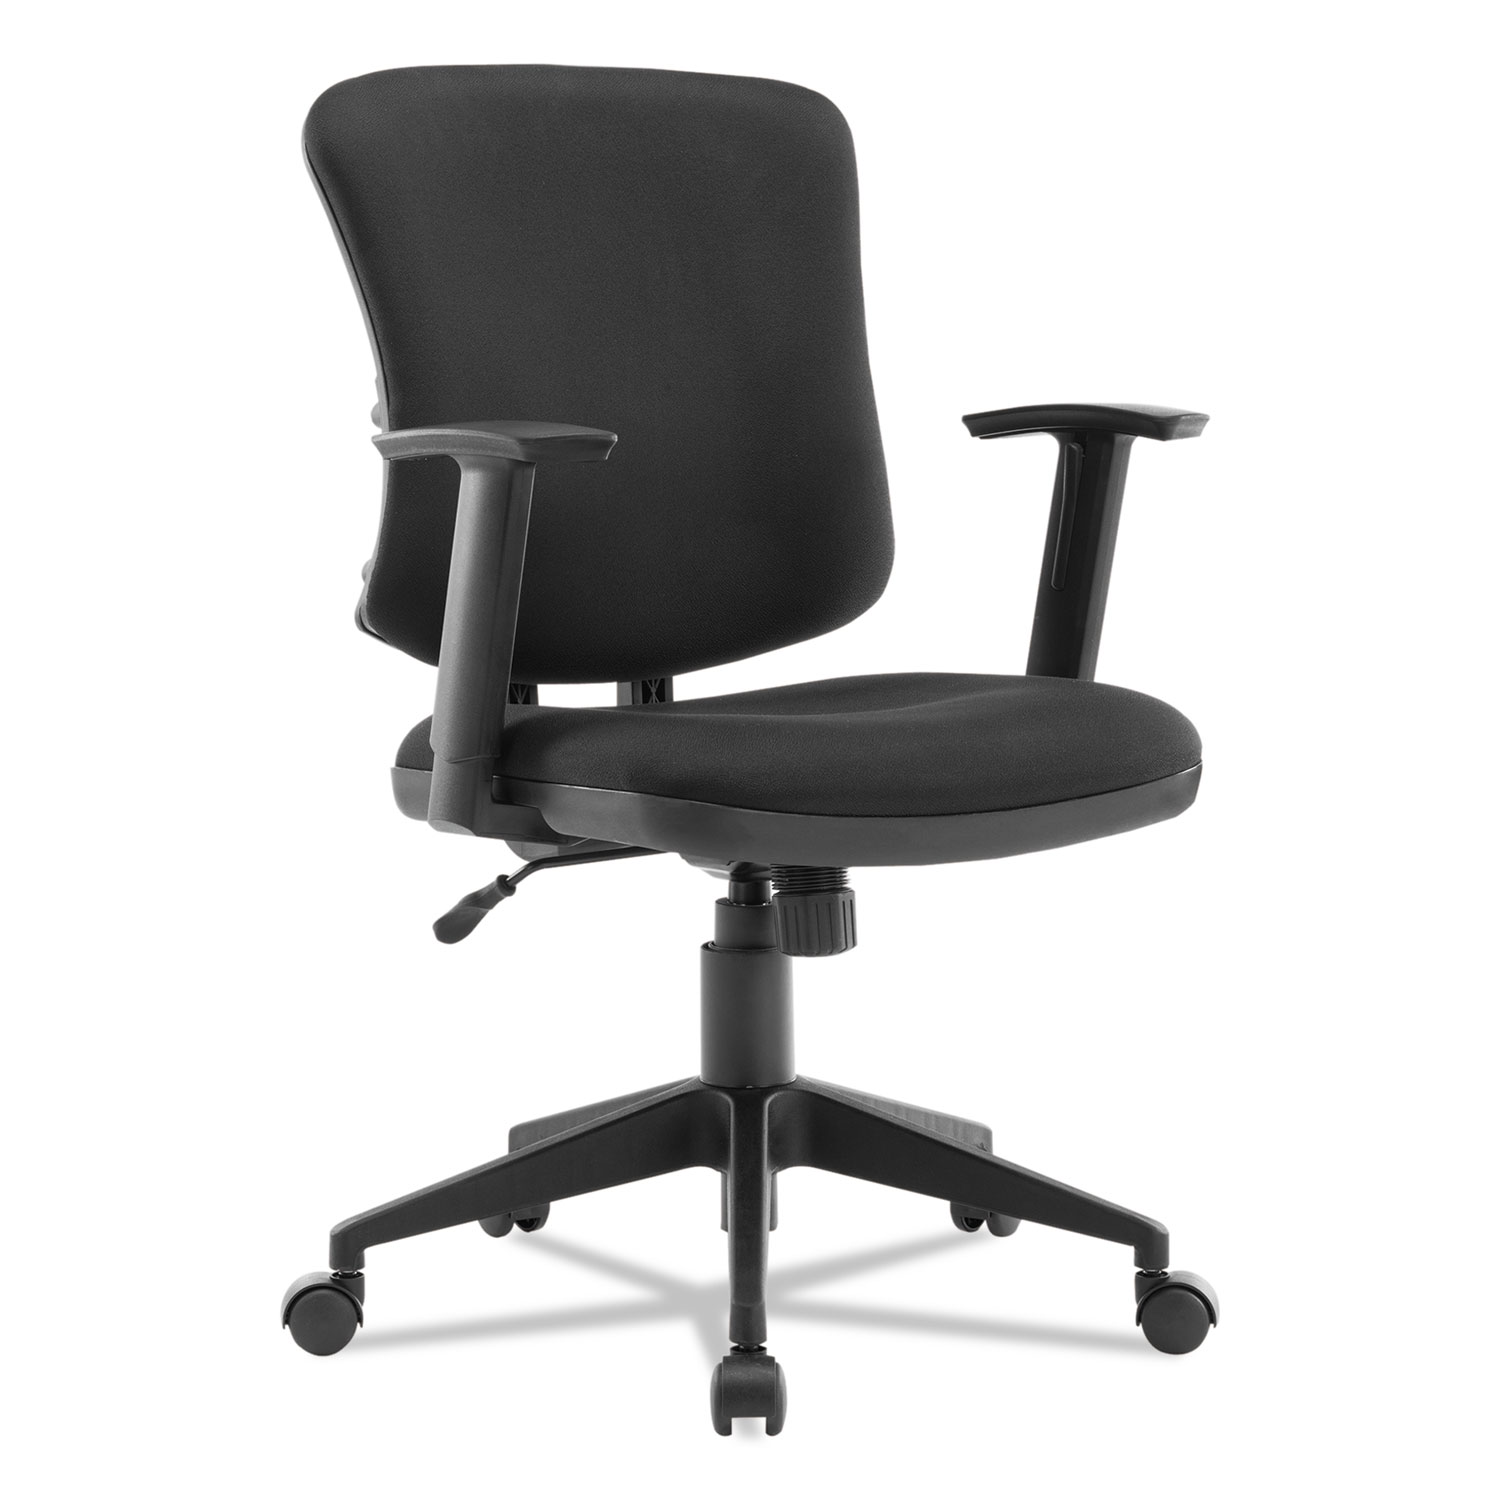  Alera ALETE4810 Everyday Task Office Chair, Supports up to 275 lbs., Black Seat/Black Back, Black Base (ALETE4810) 